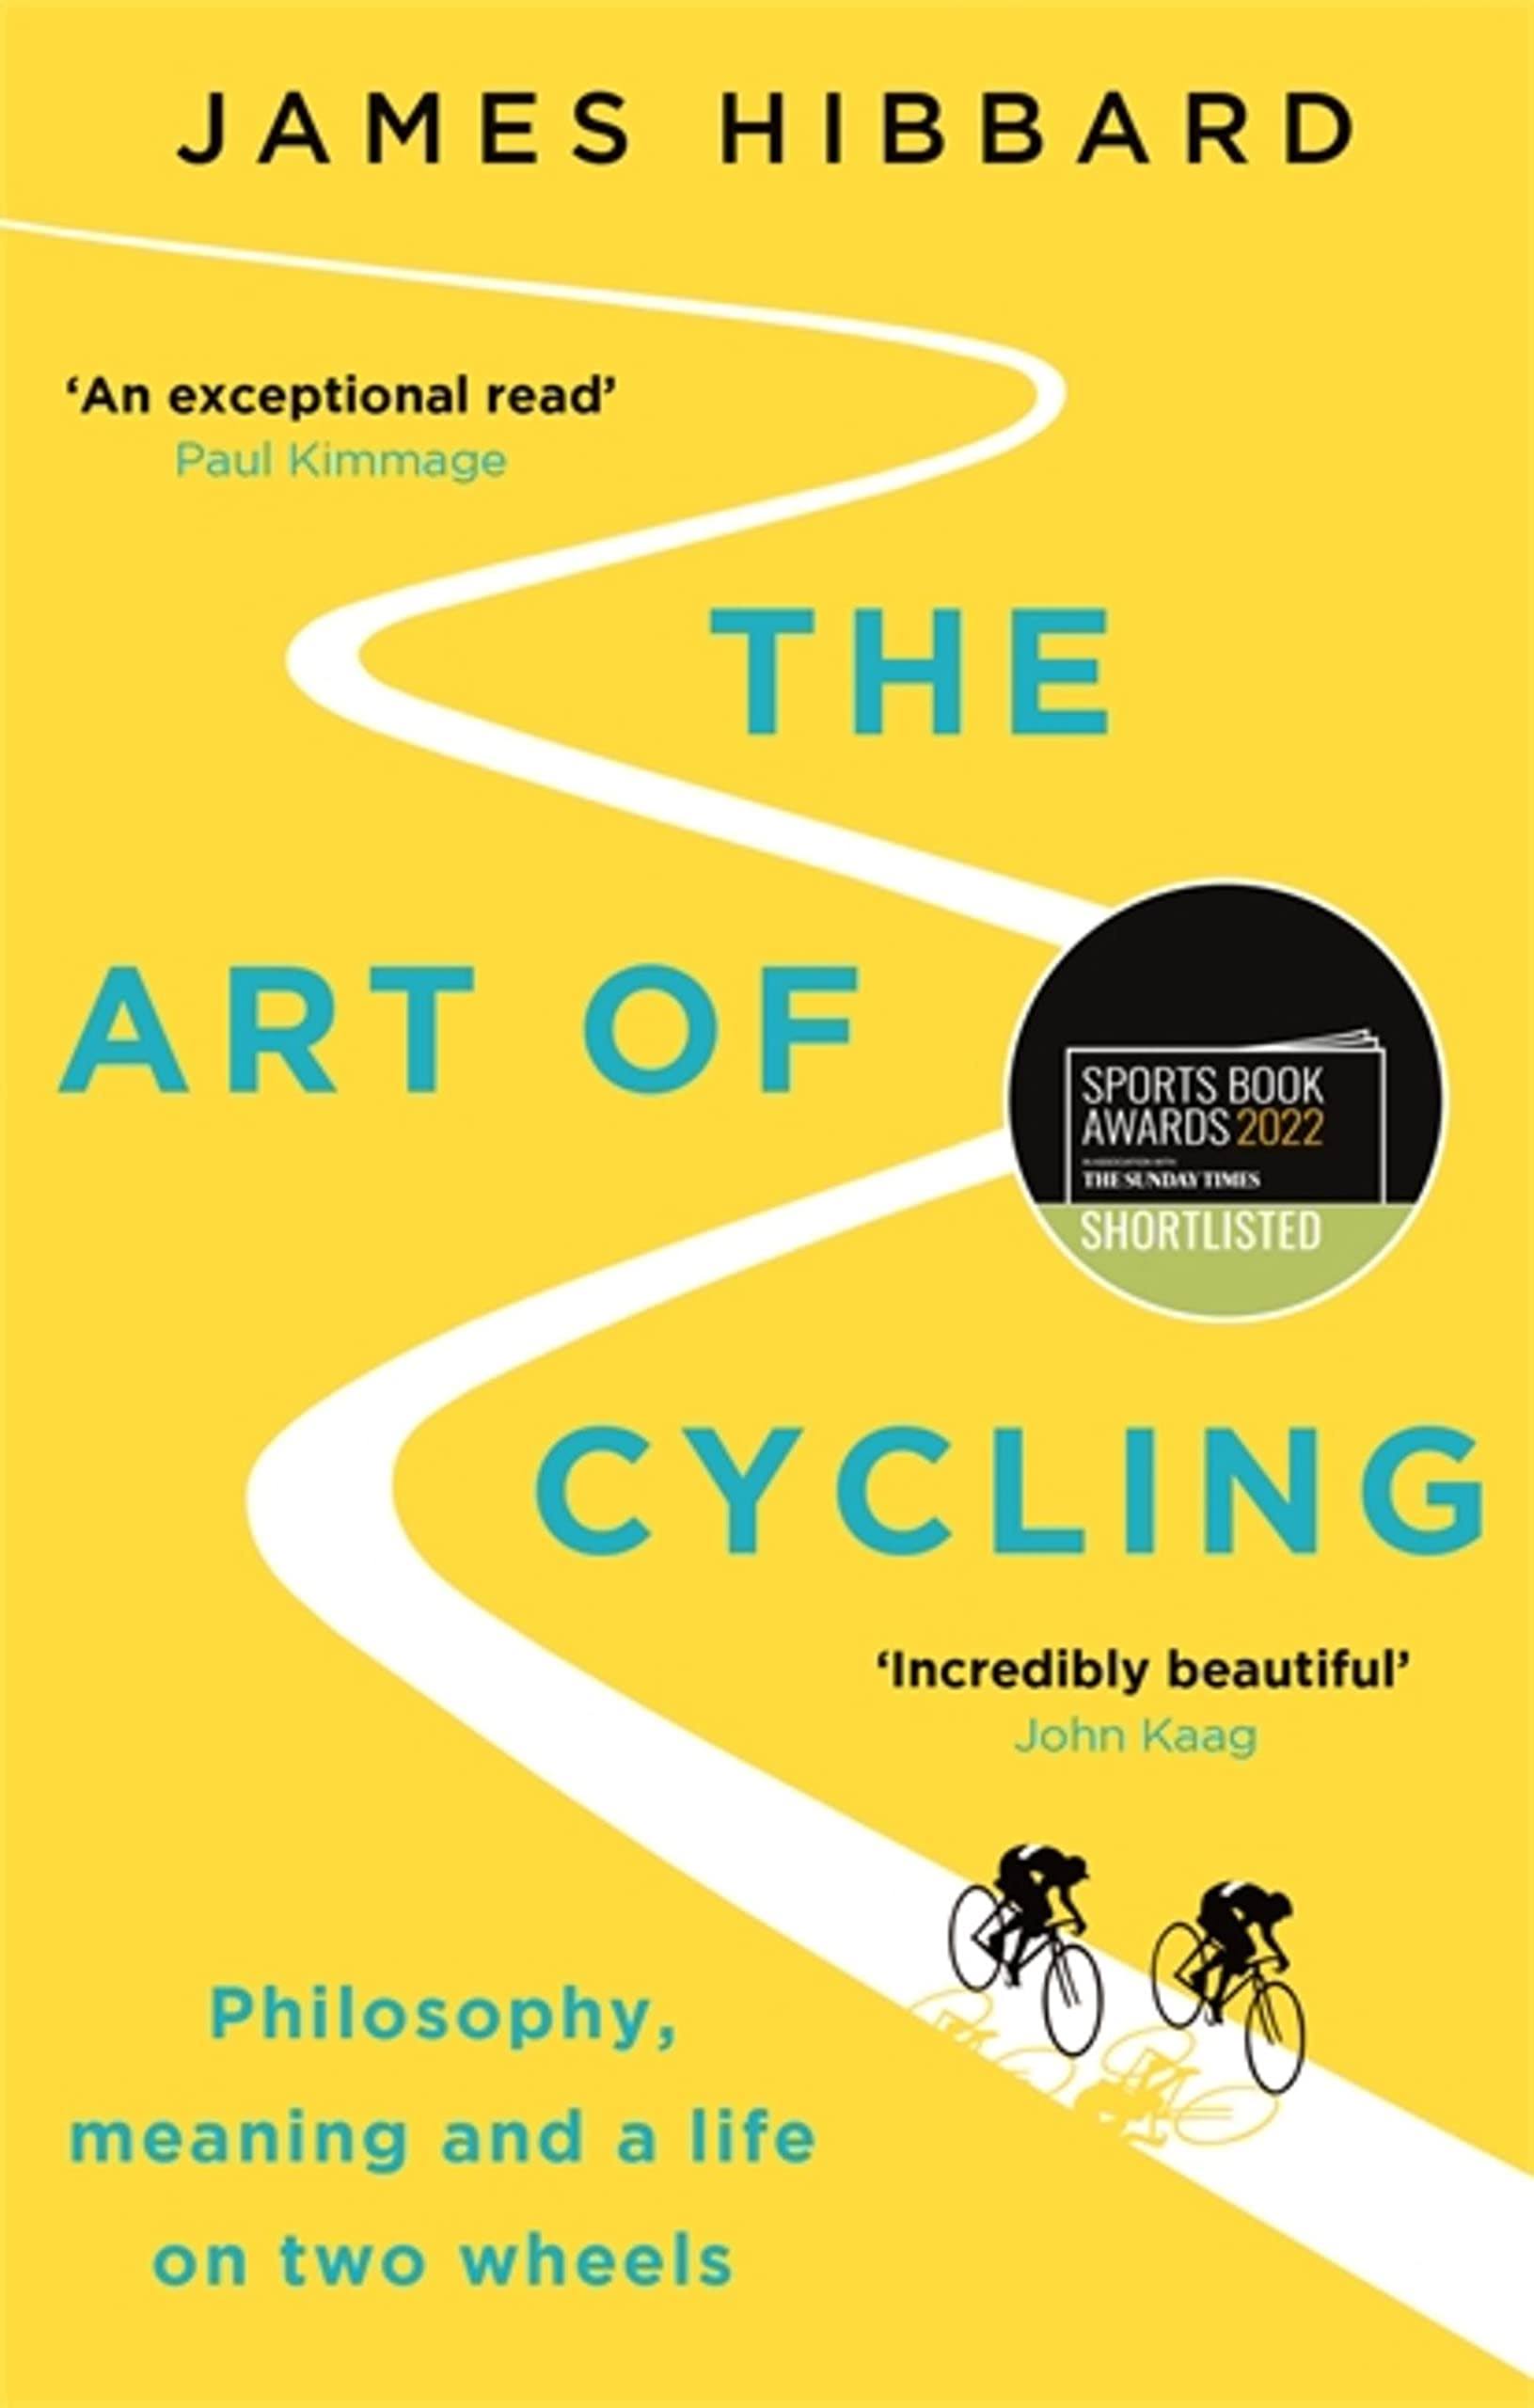 The Art of Cycling [Book]